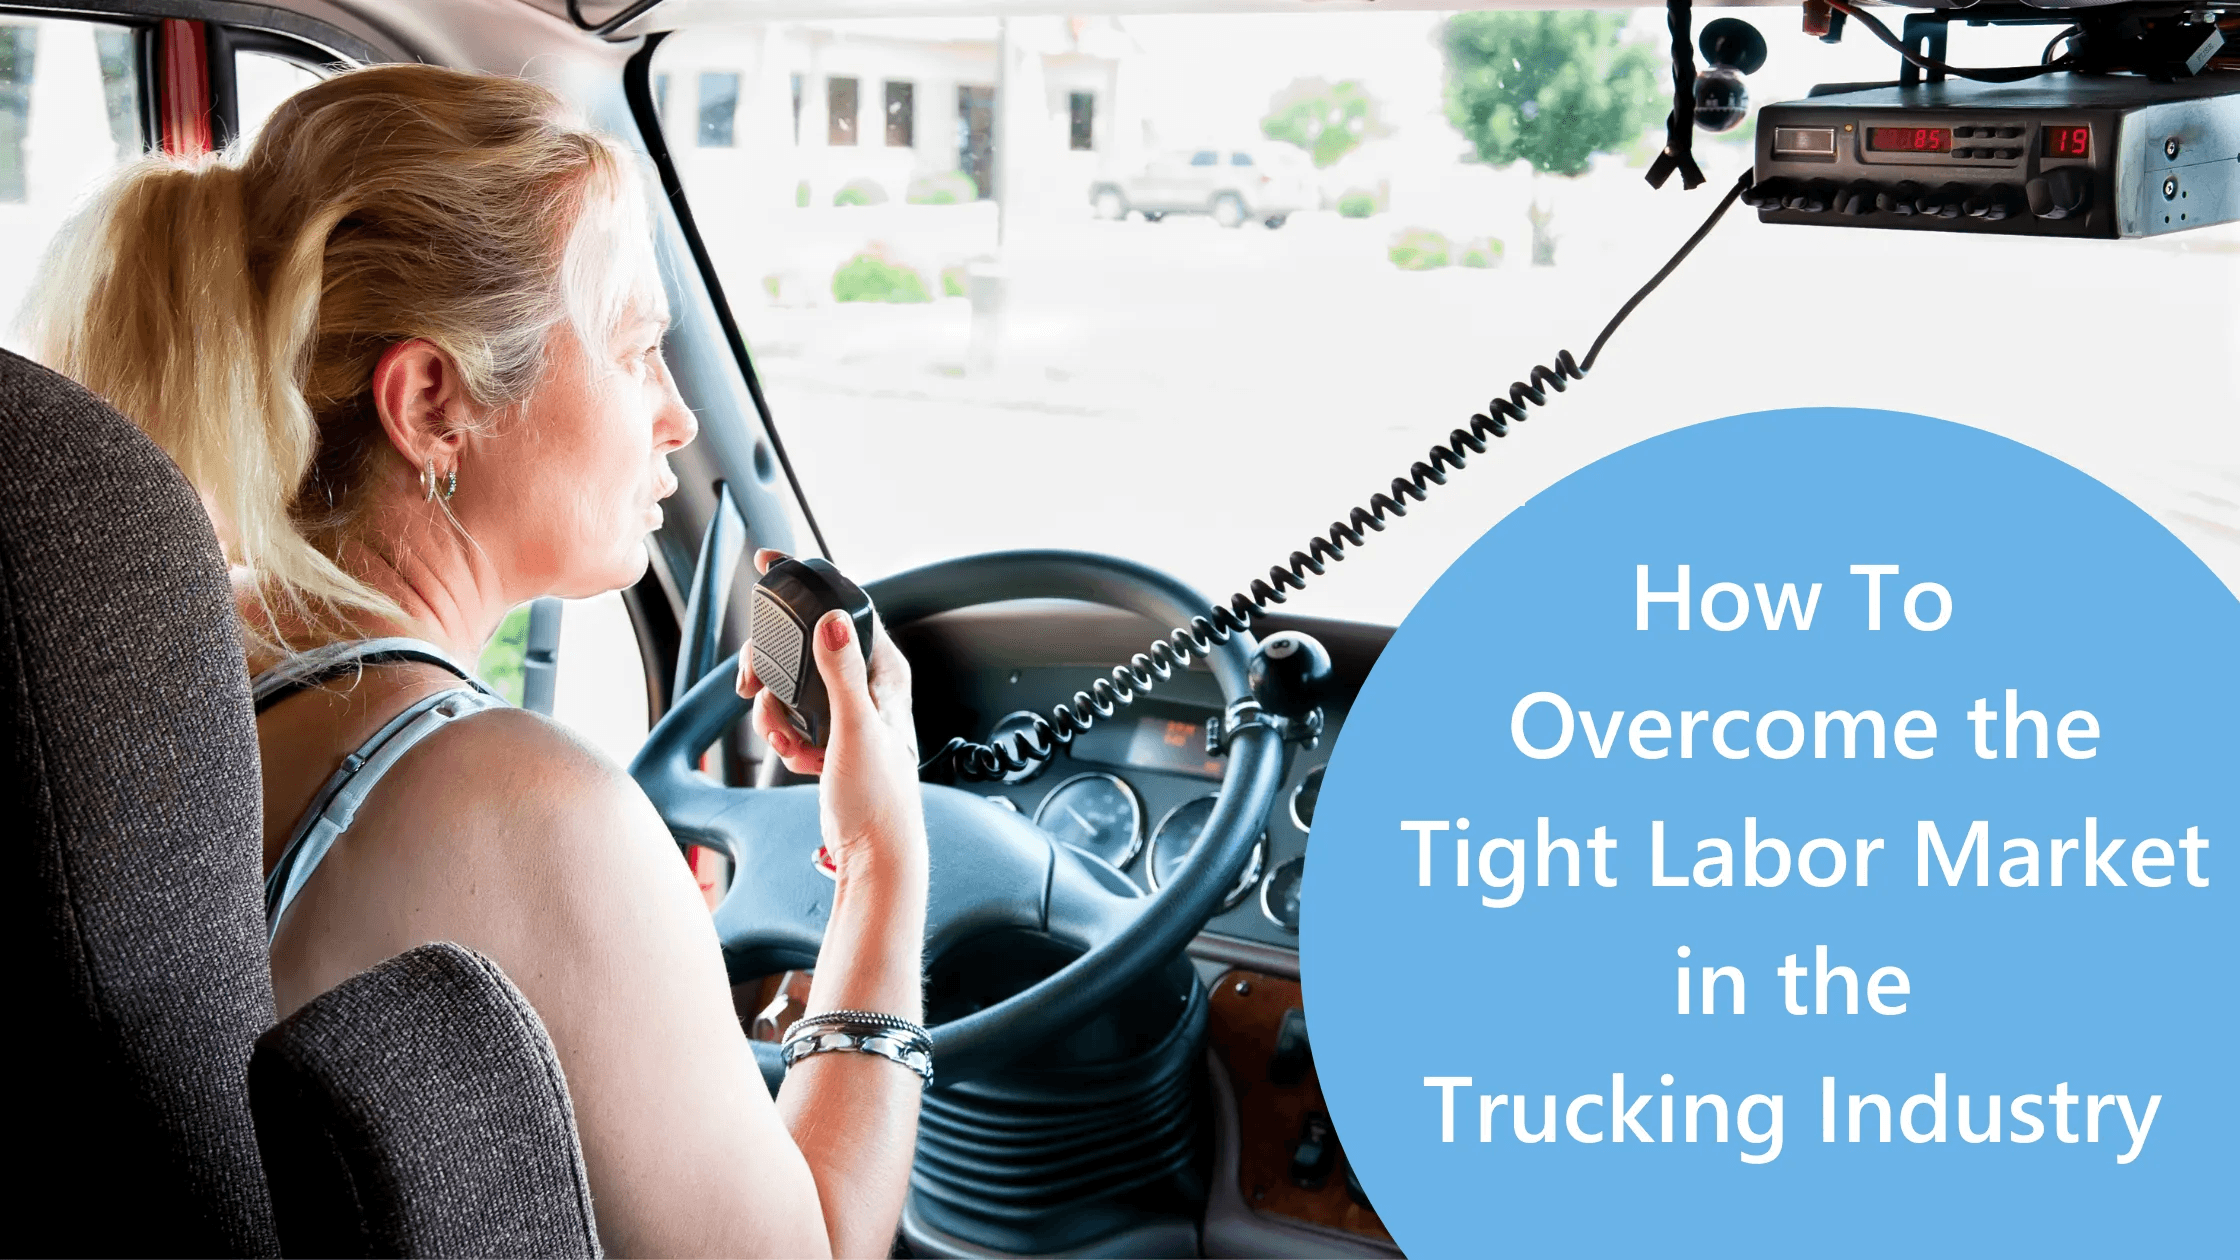 A woman speaking on a radio in a truck with the text "How To Overcome the Tight Labor Market in the Trucking Industry"